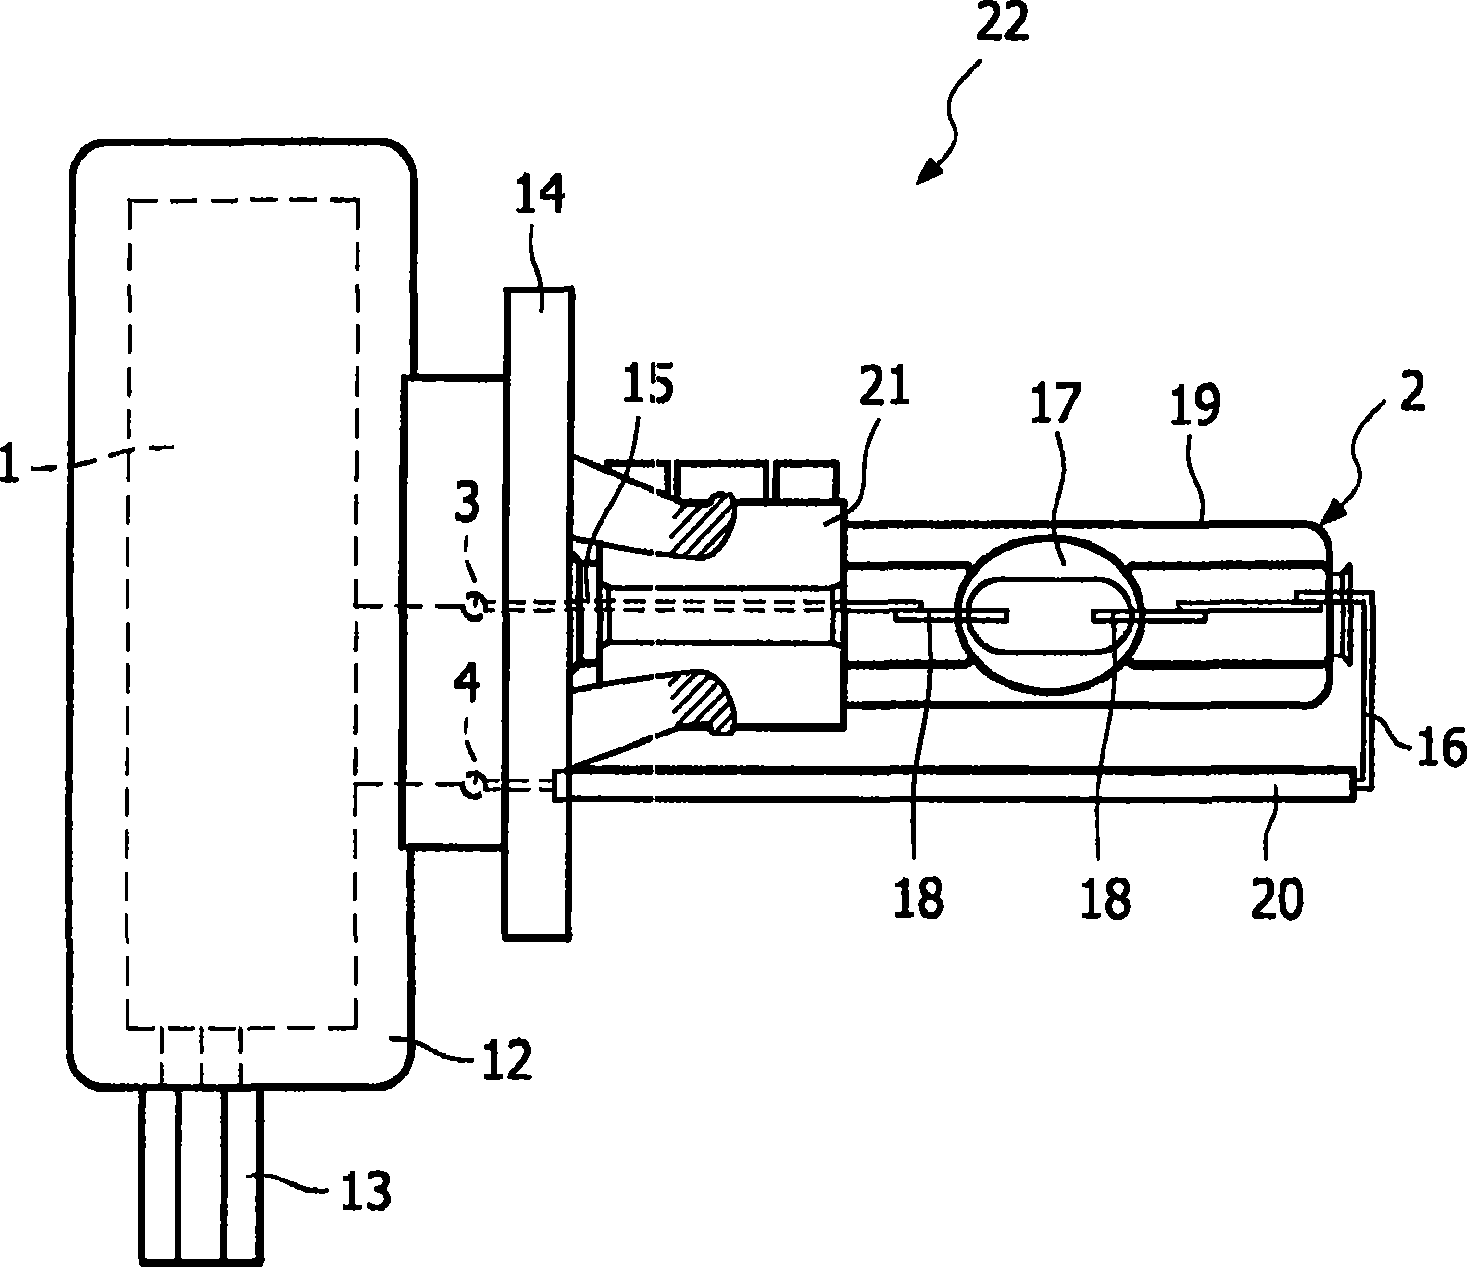 Circuit arrangement and method of driving a high-pressure gas discharge lamp